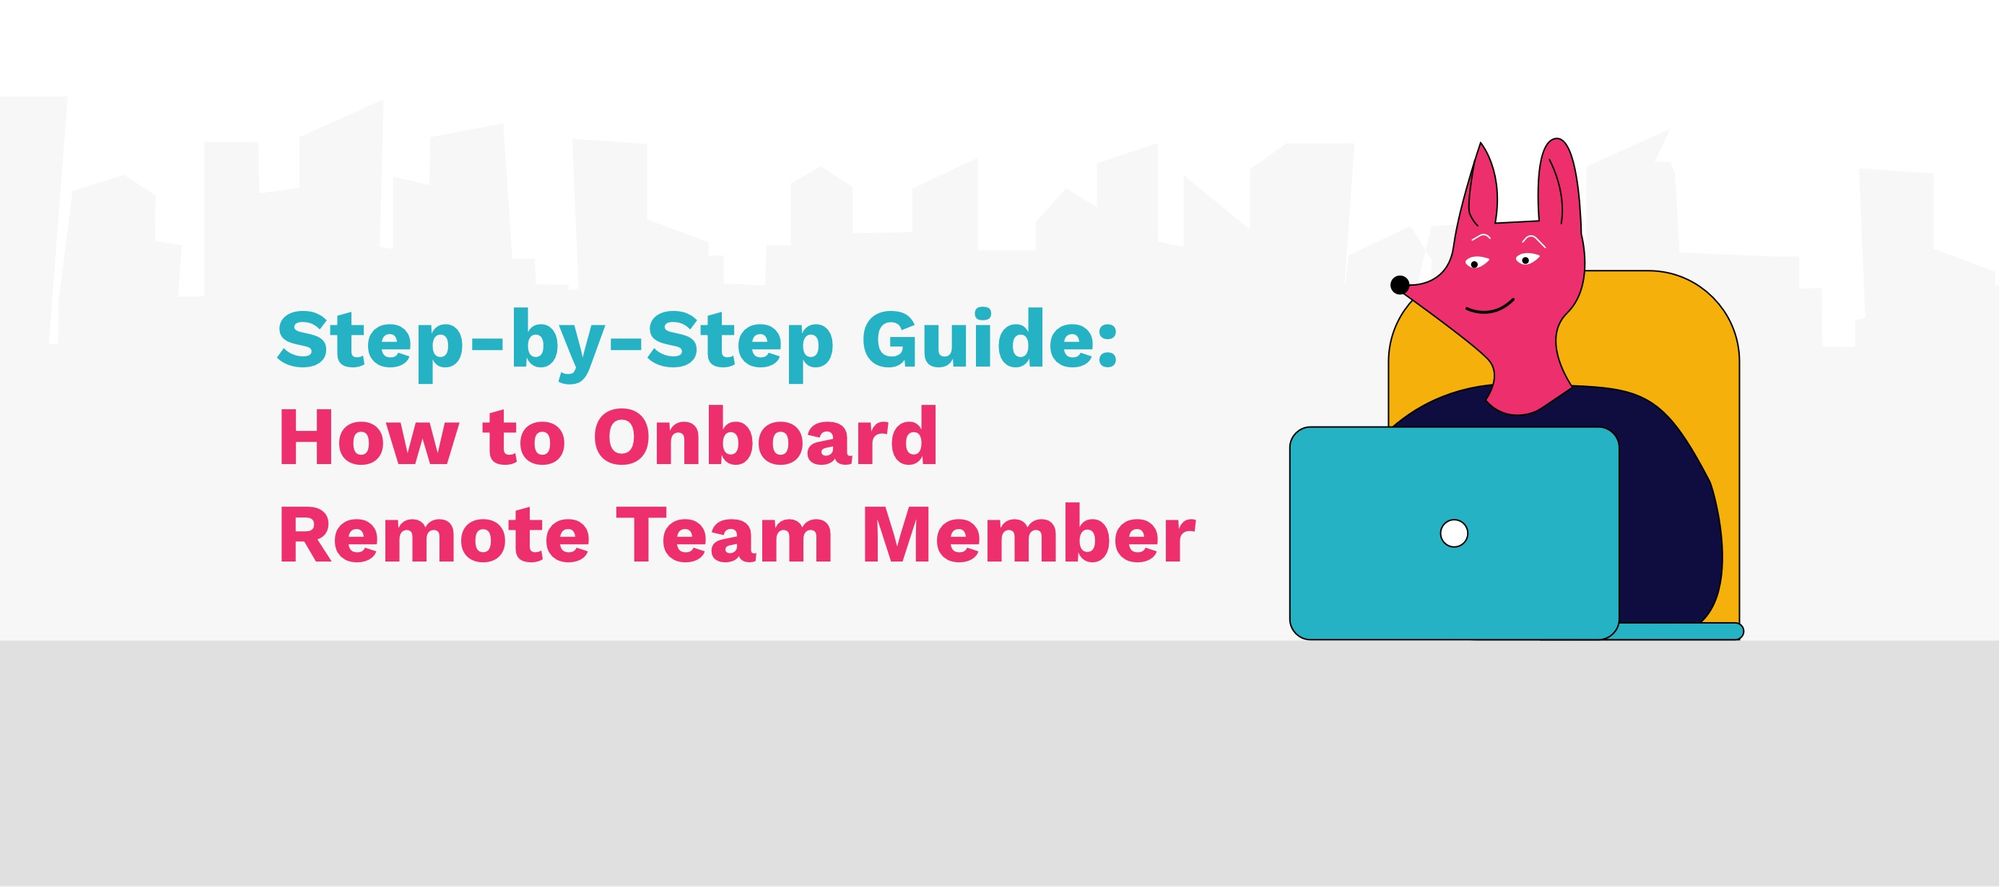 Onboarding a Remote Team Member: Guide on How to Do It Right